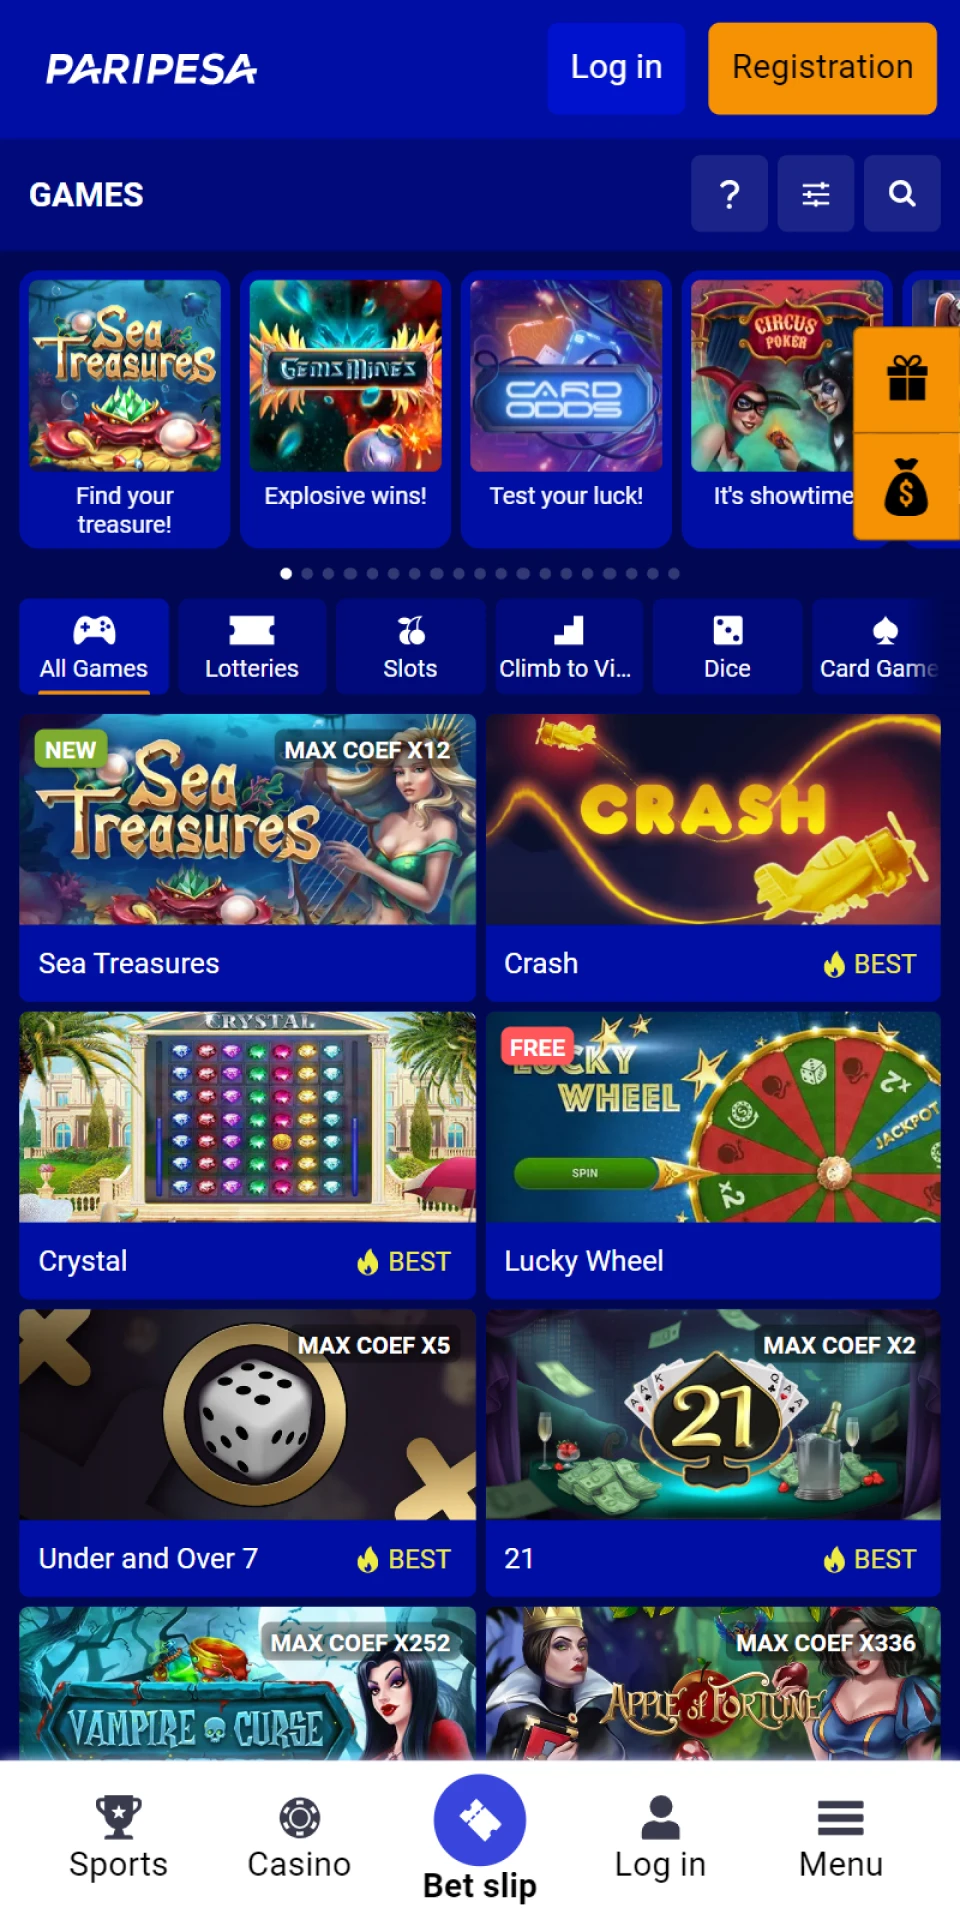 Play casino games on the Paripesa mobile app.